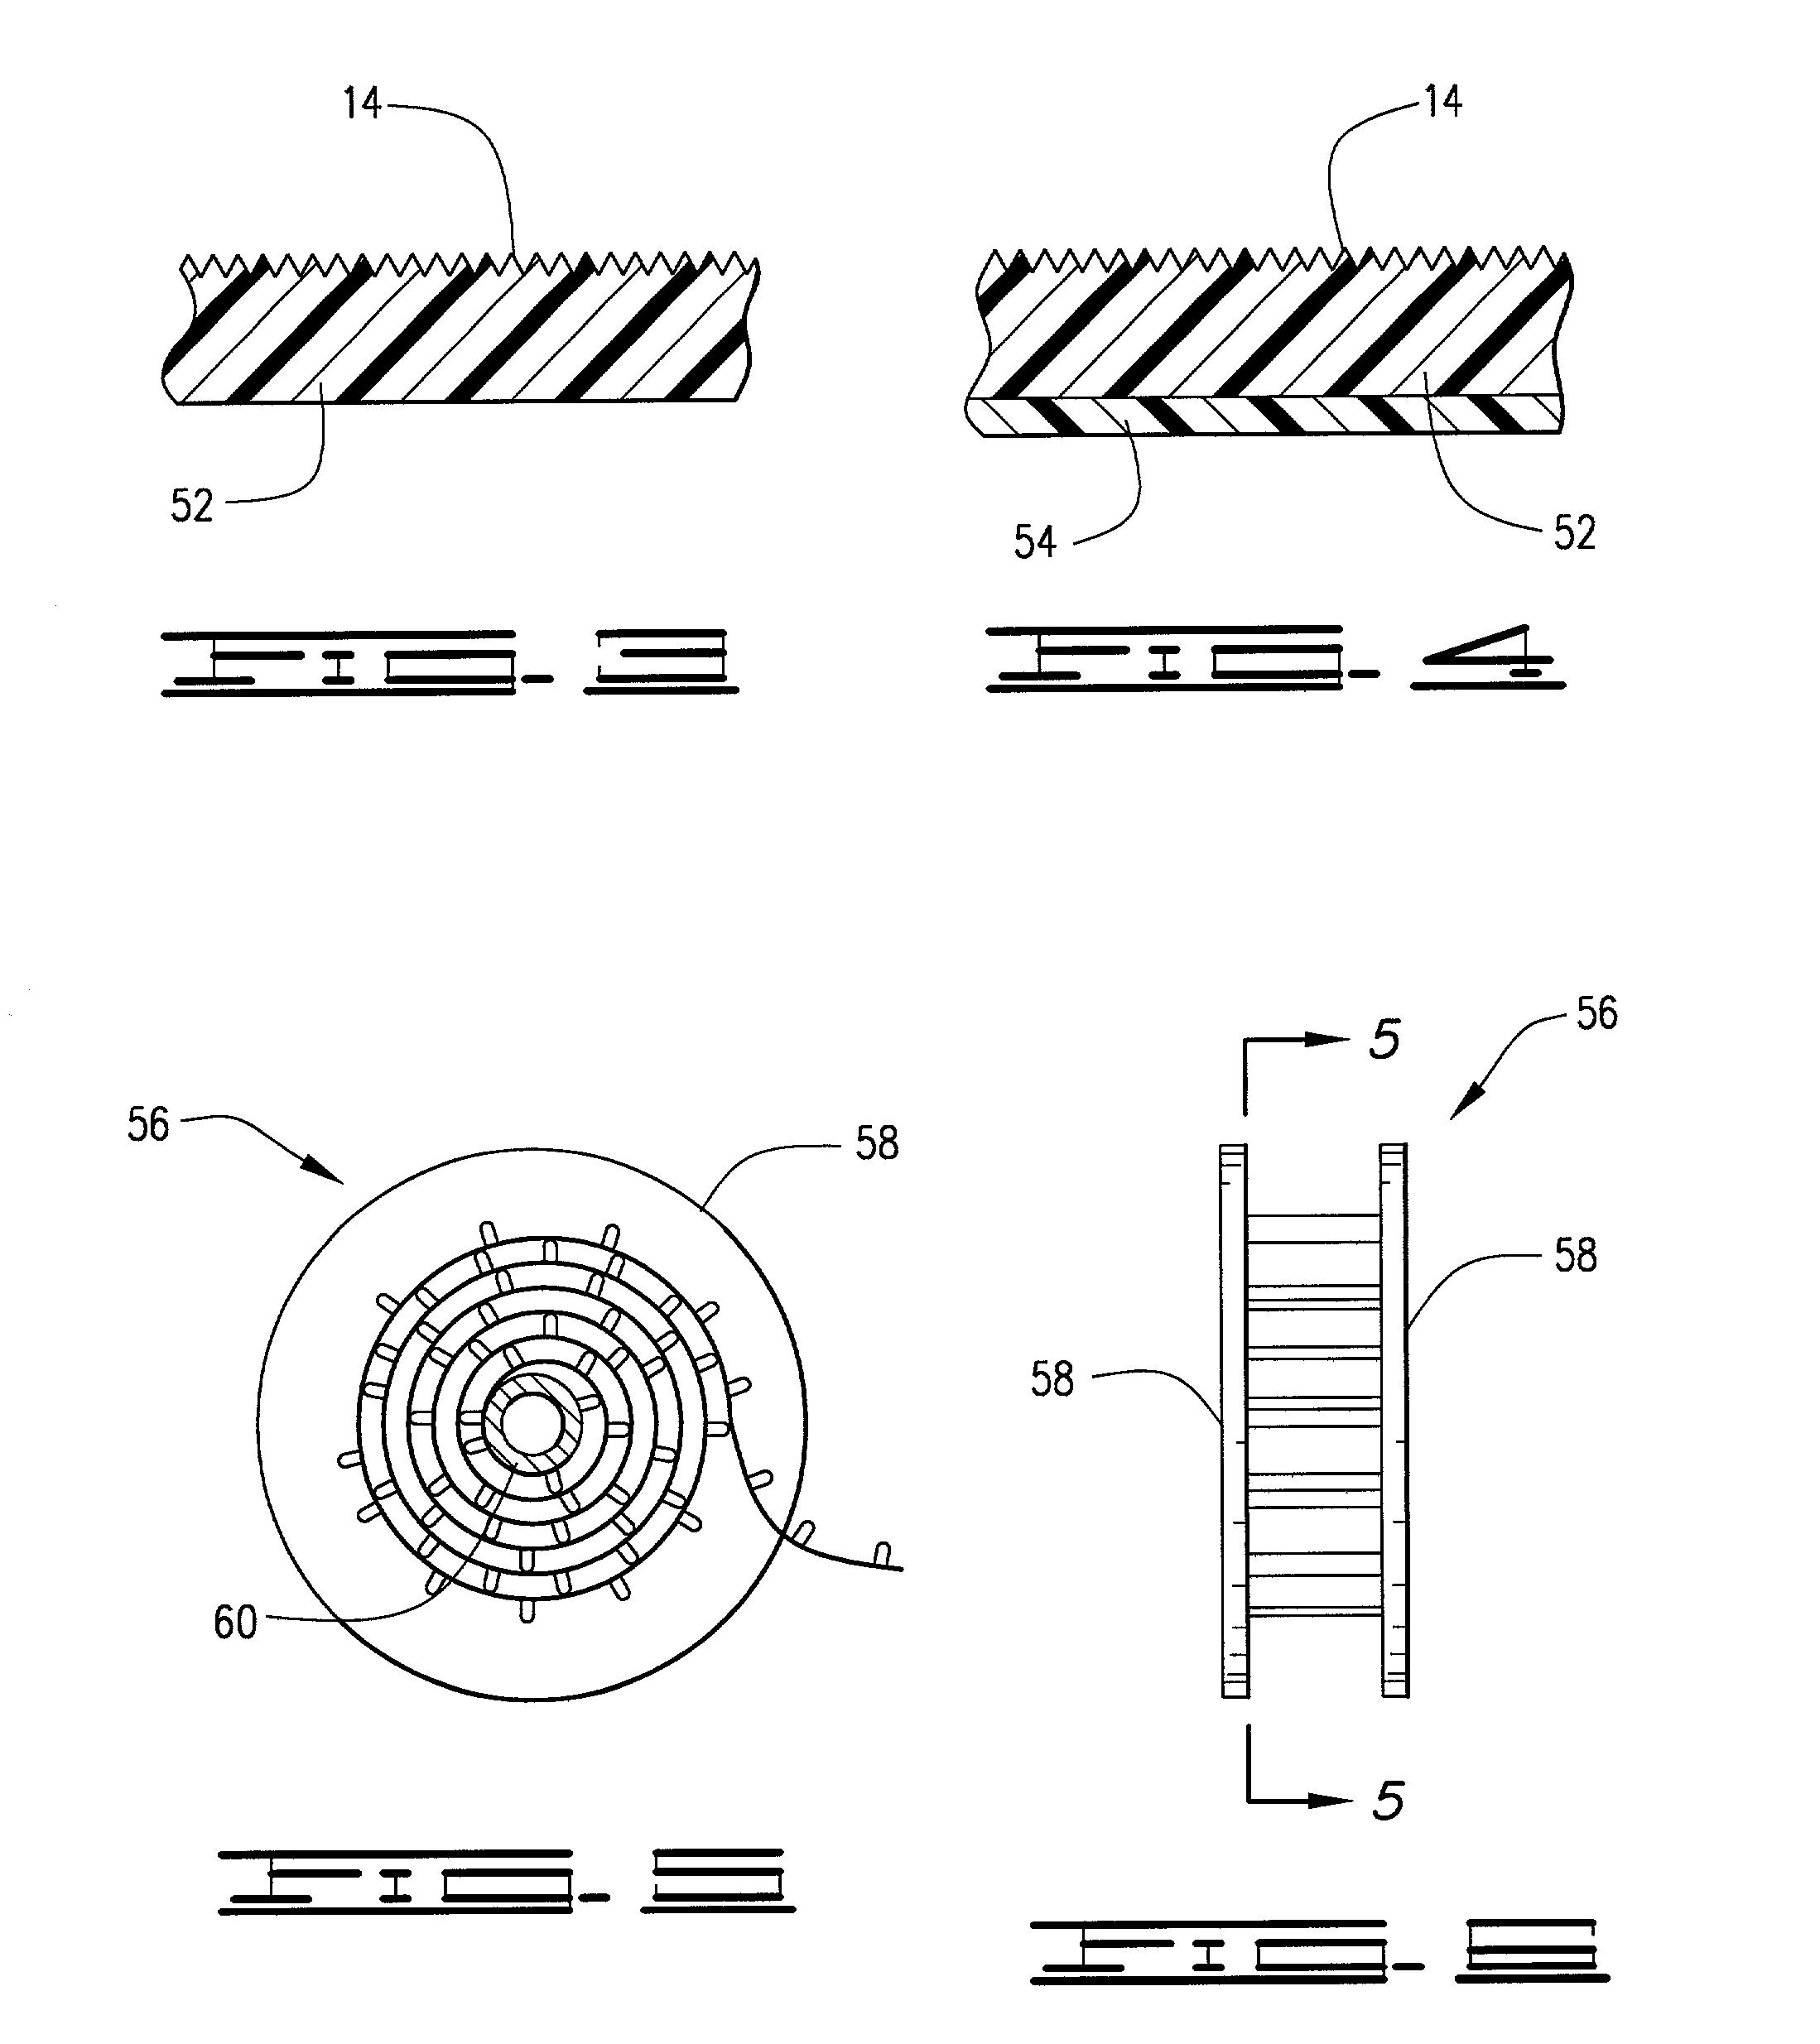 Construction layout stripping having a plurality of pairs of uprights thereon